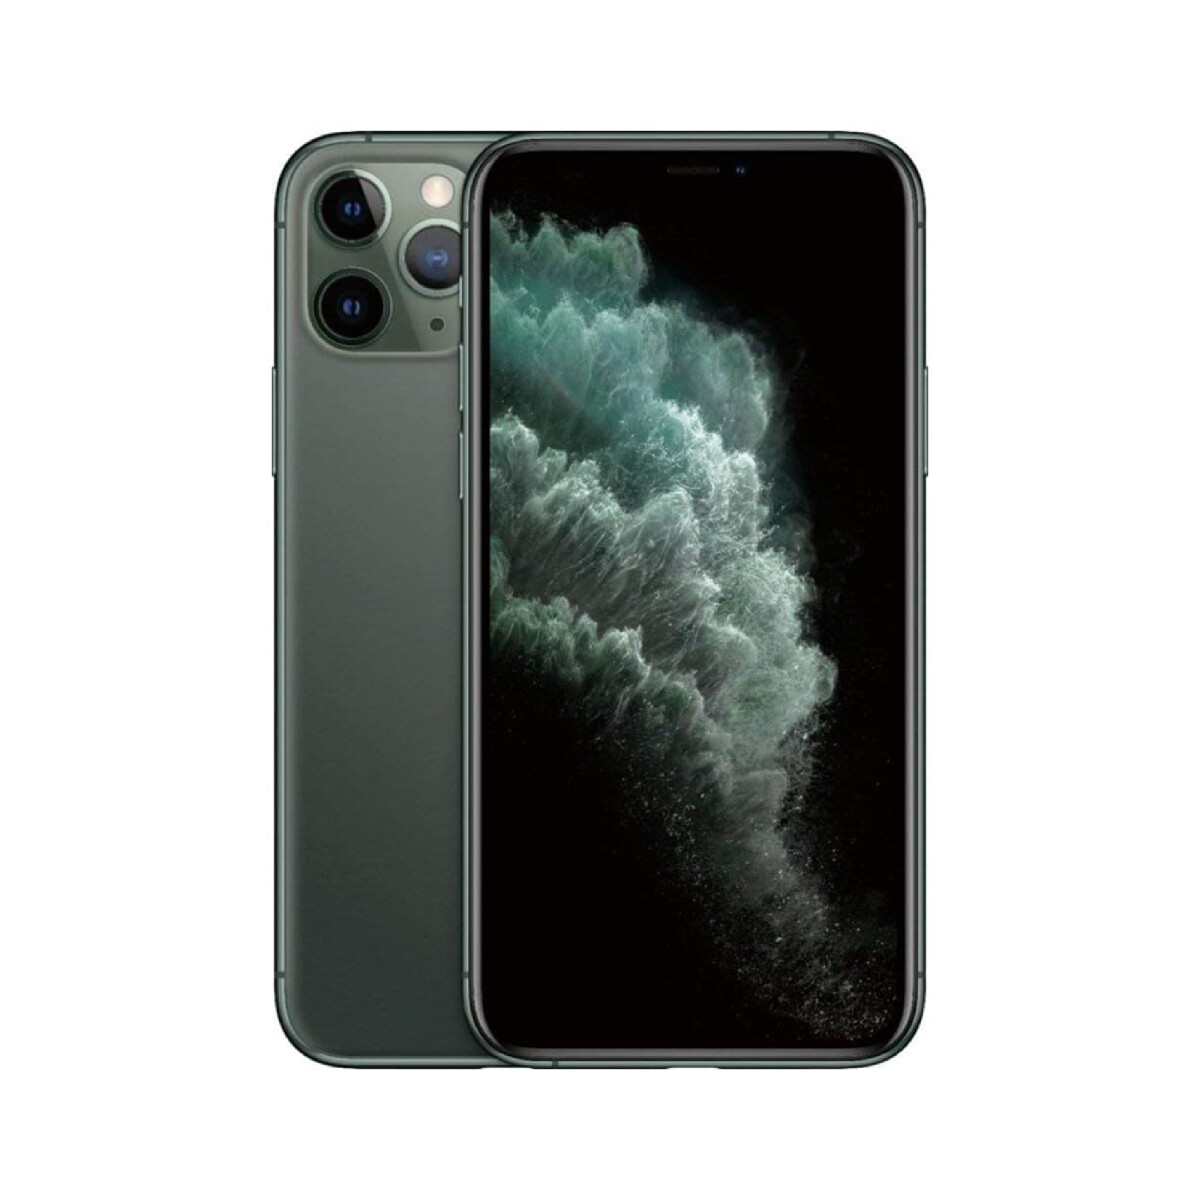 IPhone 11 Pro 512 GB - Space Gray 